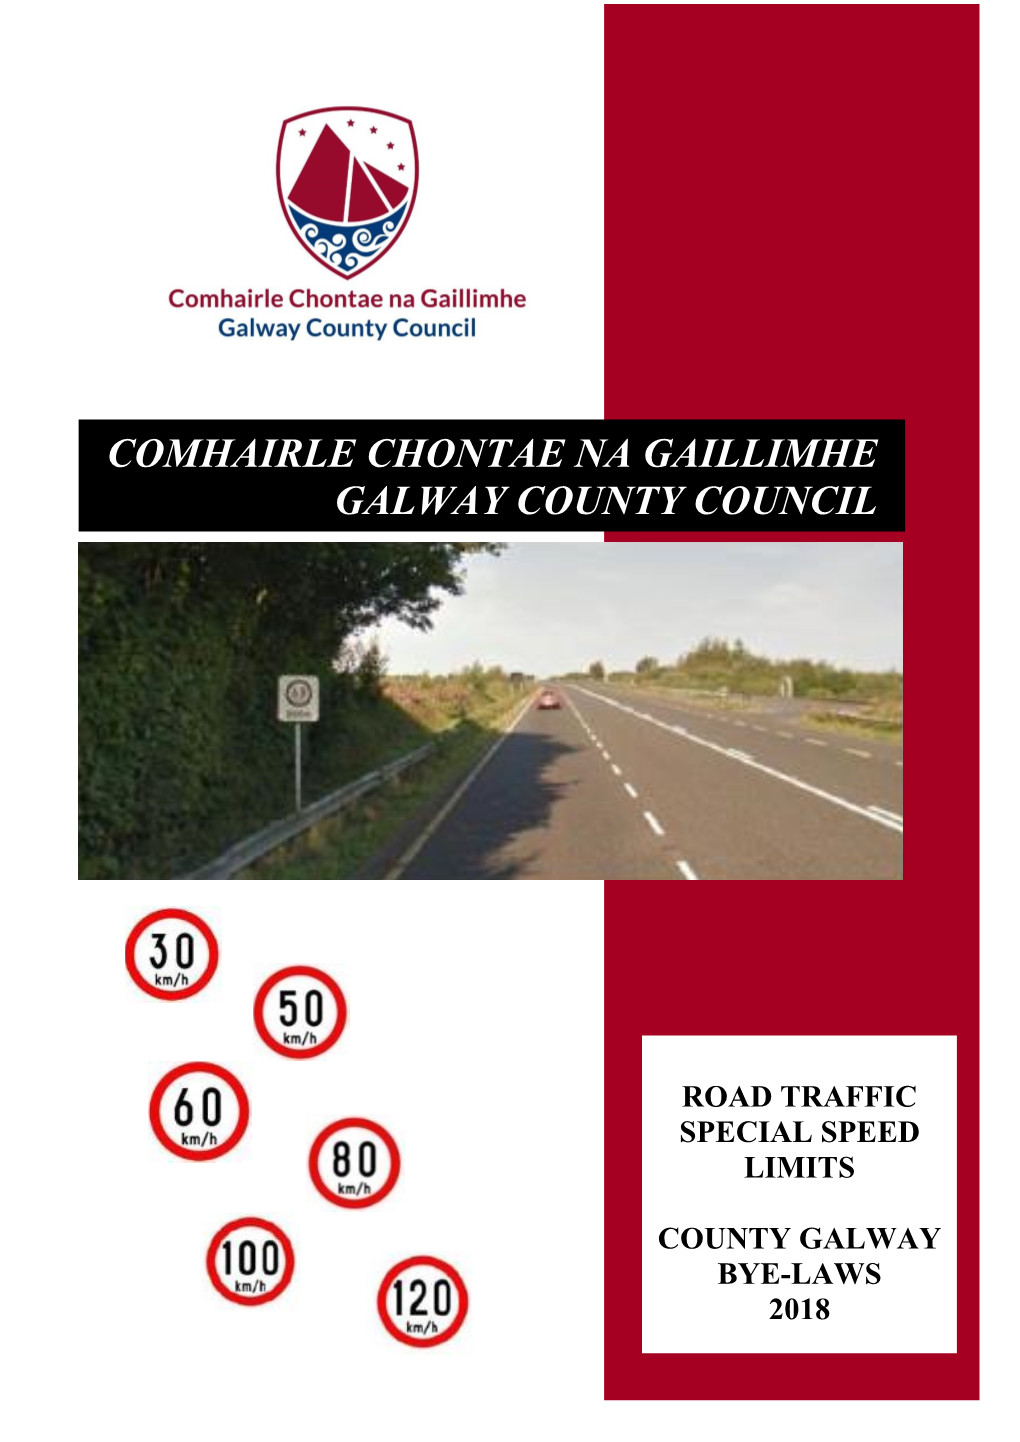 (Special Speed Limits) County Galway Bye-Laws 2018